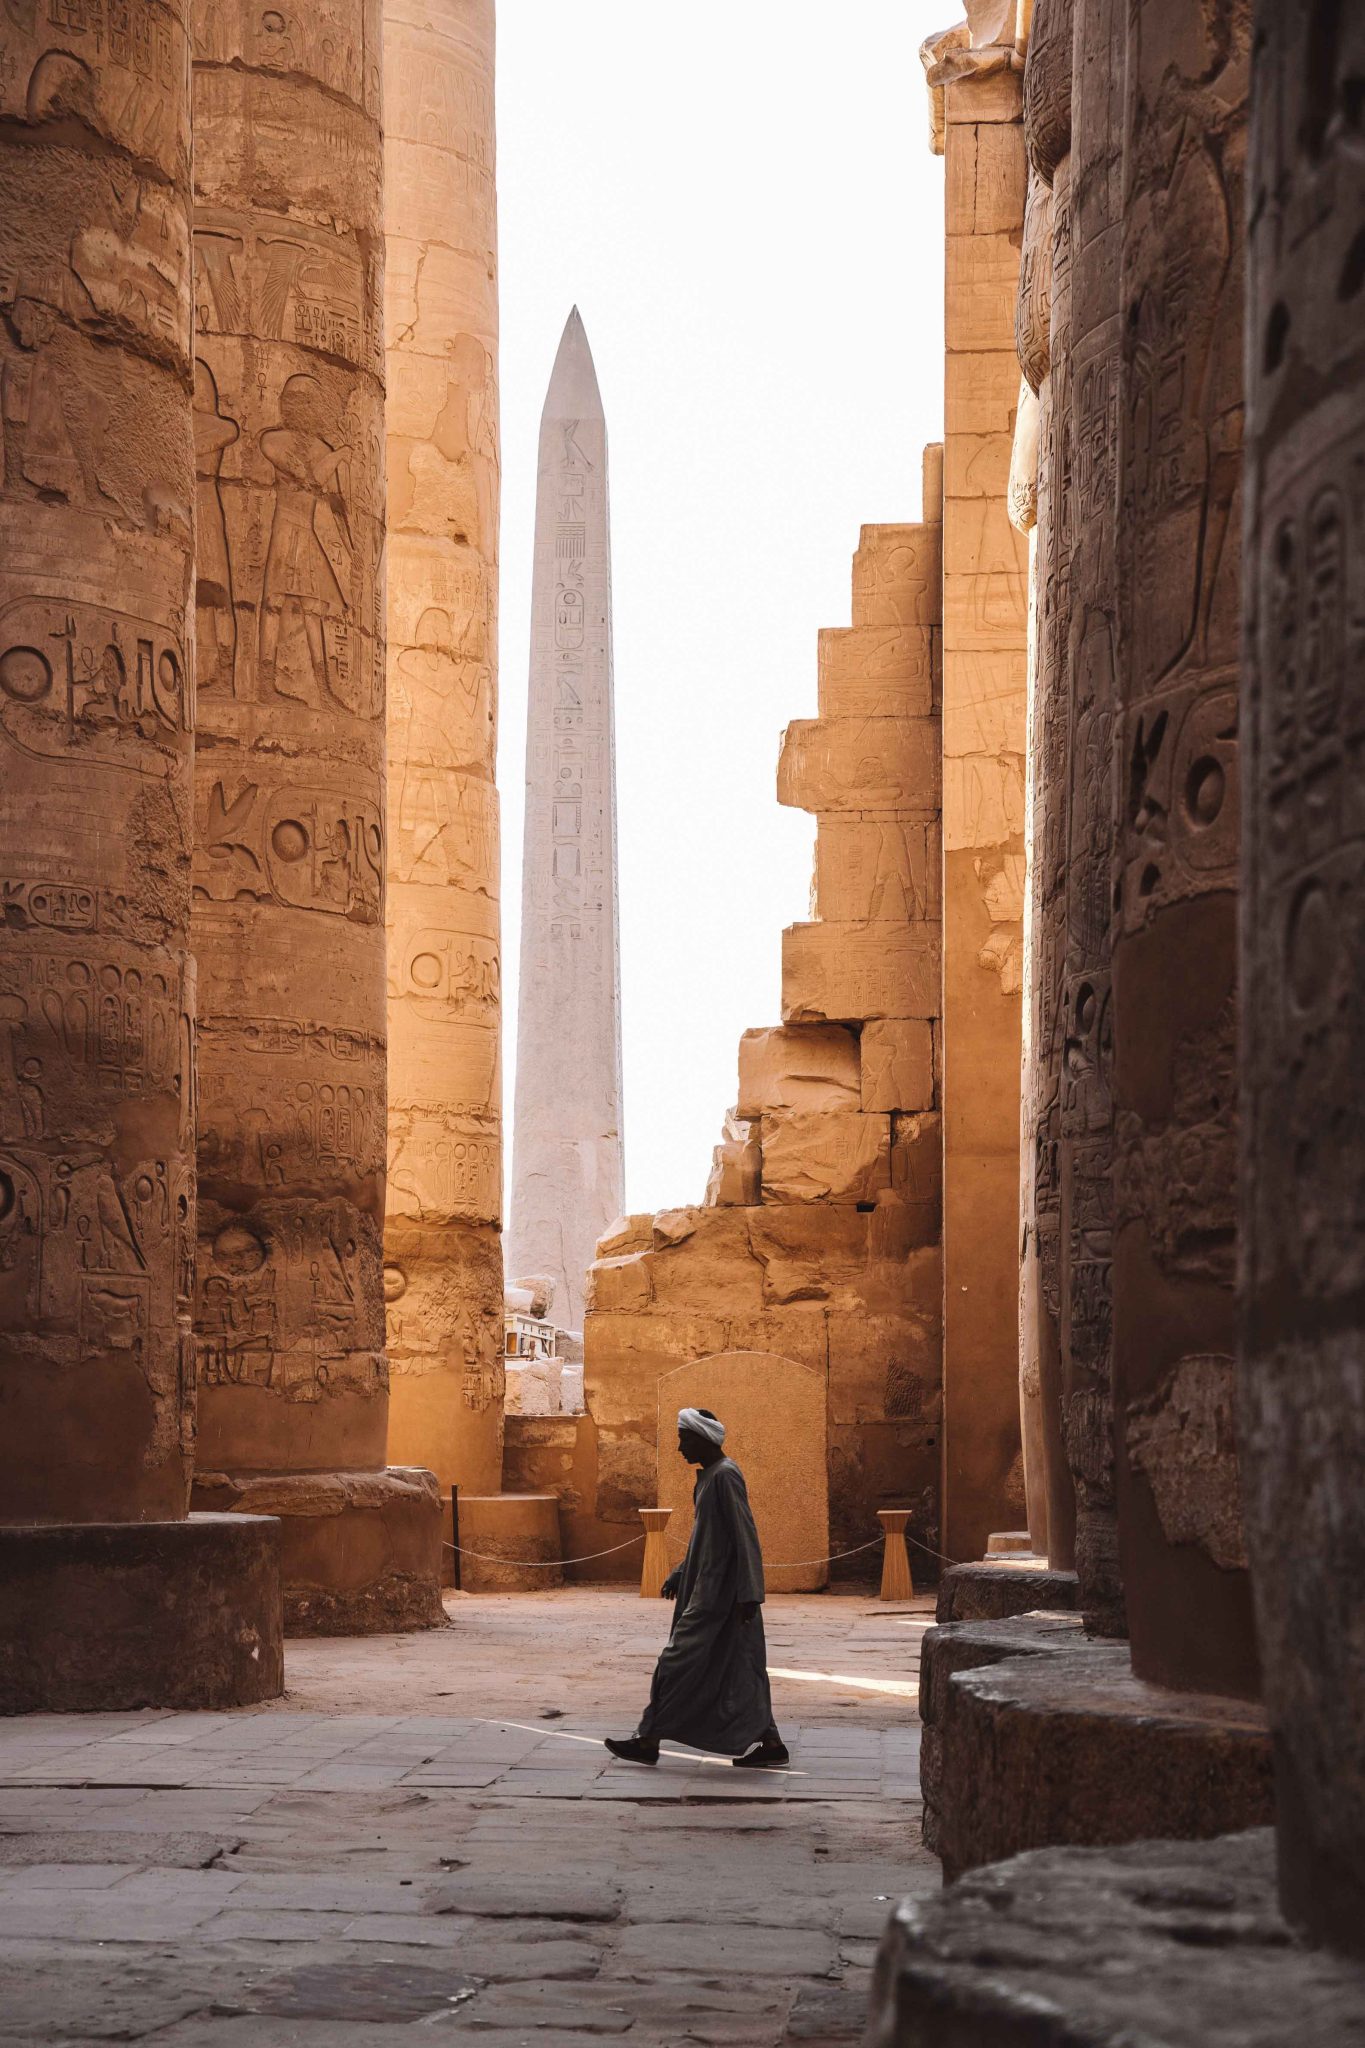 A pretty photo of someone walking in Luxor among the walls of hieroglyphs